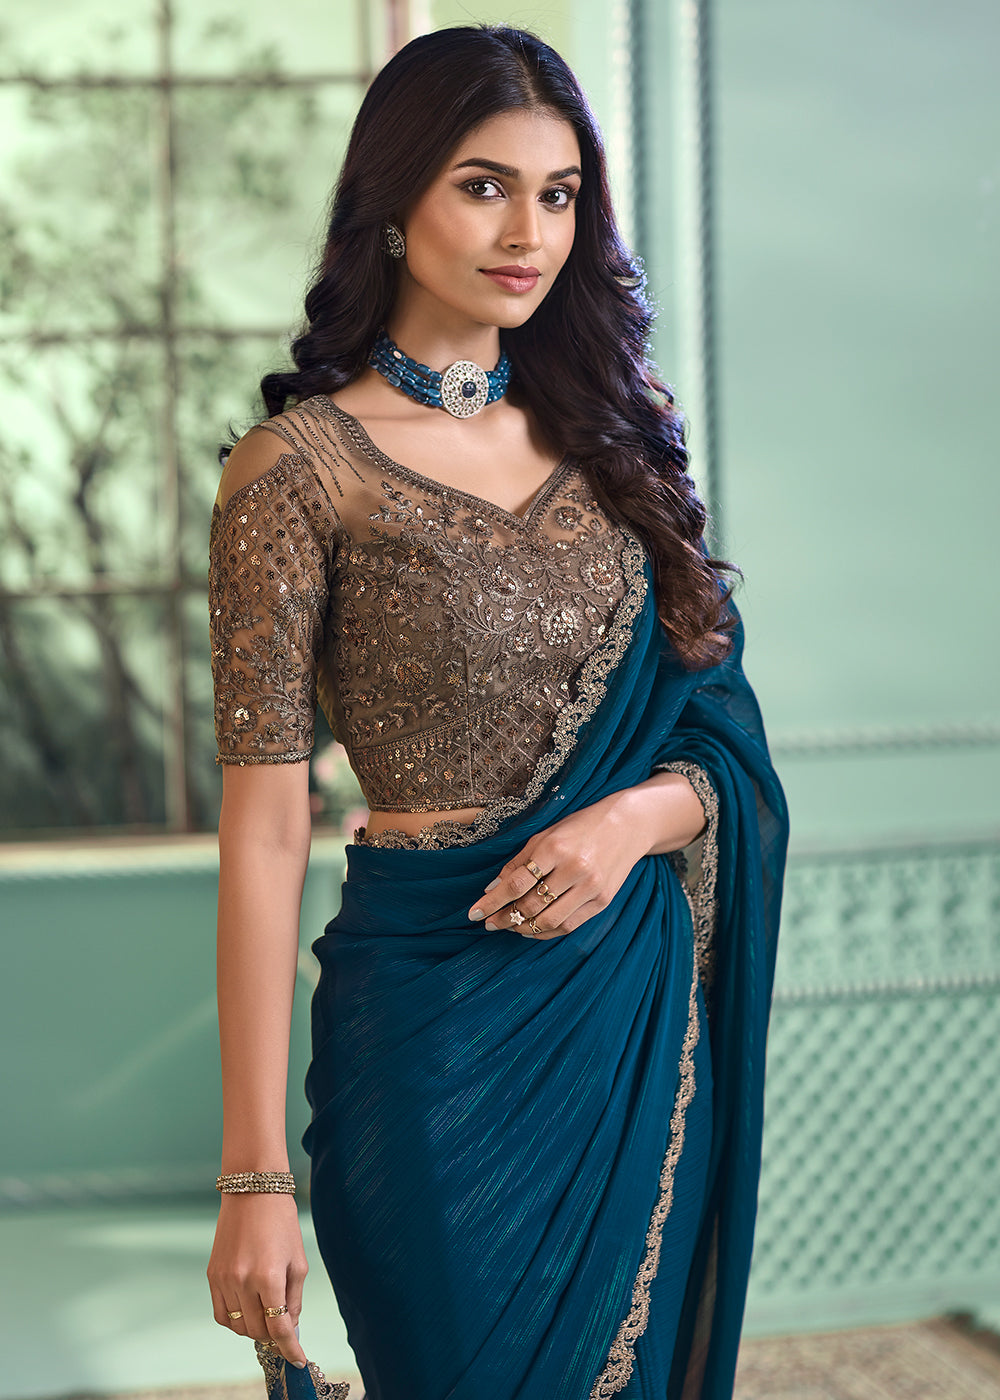 Buy Now Lovely Teal Georgette Embroidered Wedding Party Wear Saree Online in USA, UK, Canada & Worldwide at Empress Clothing.